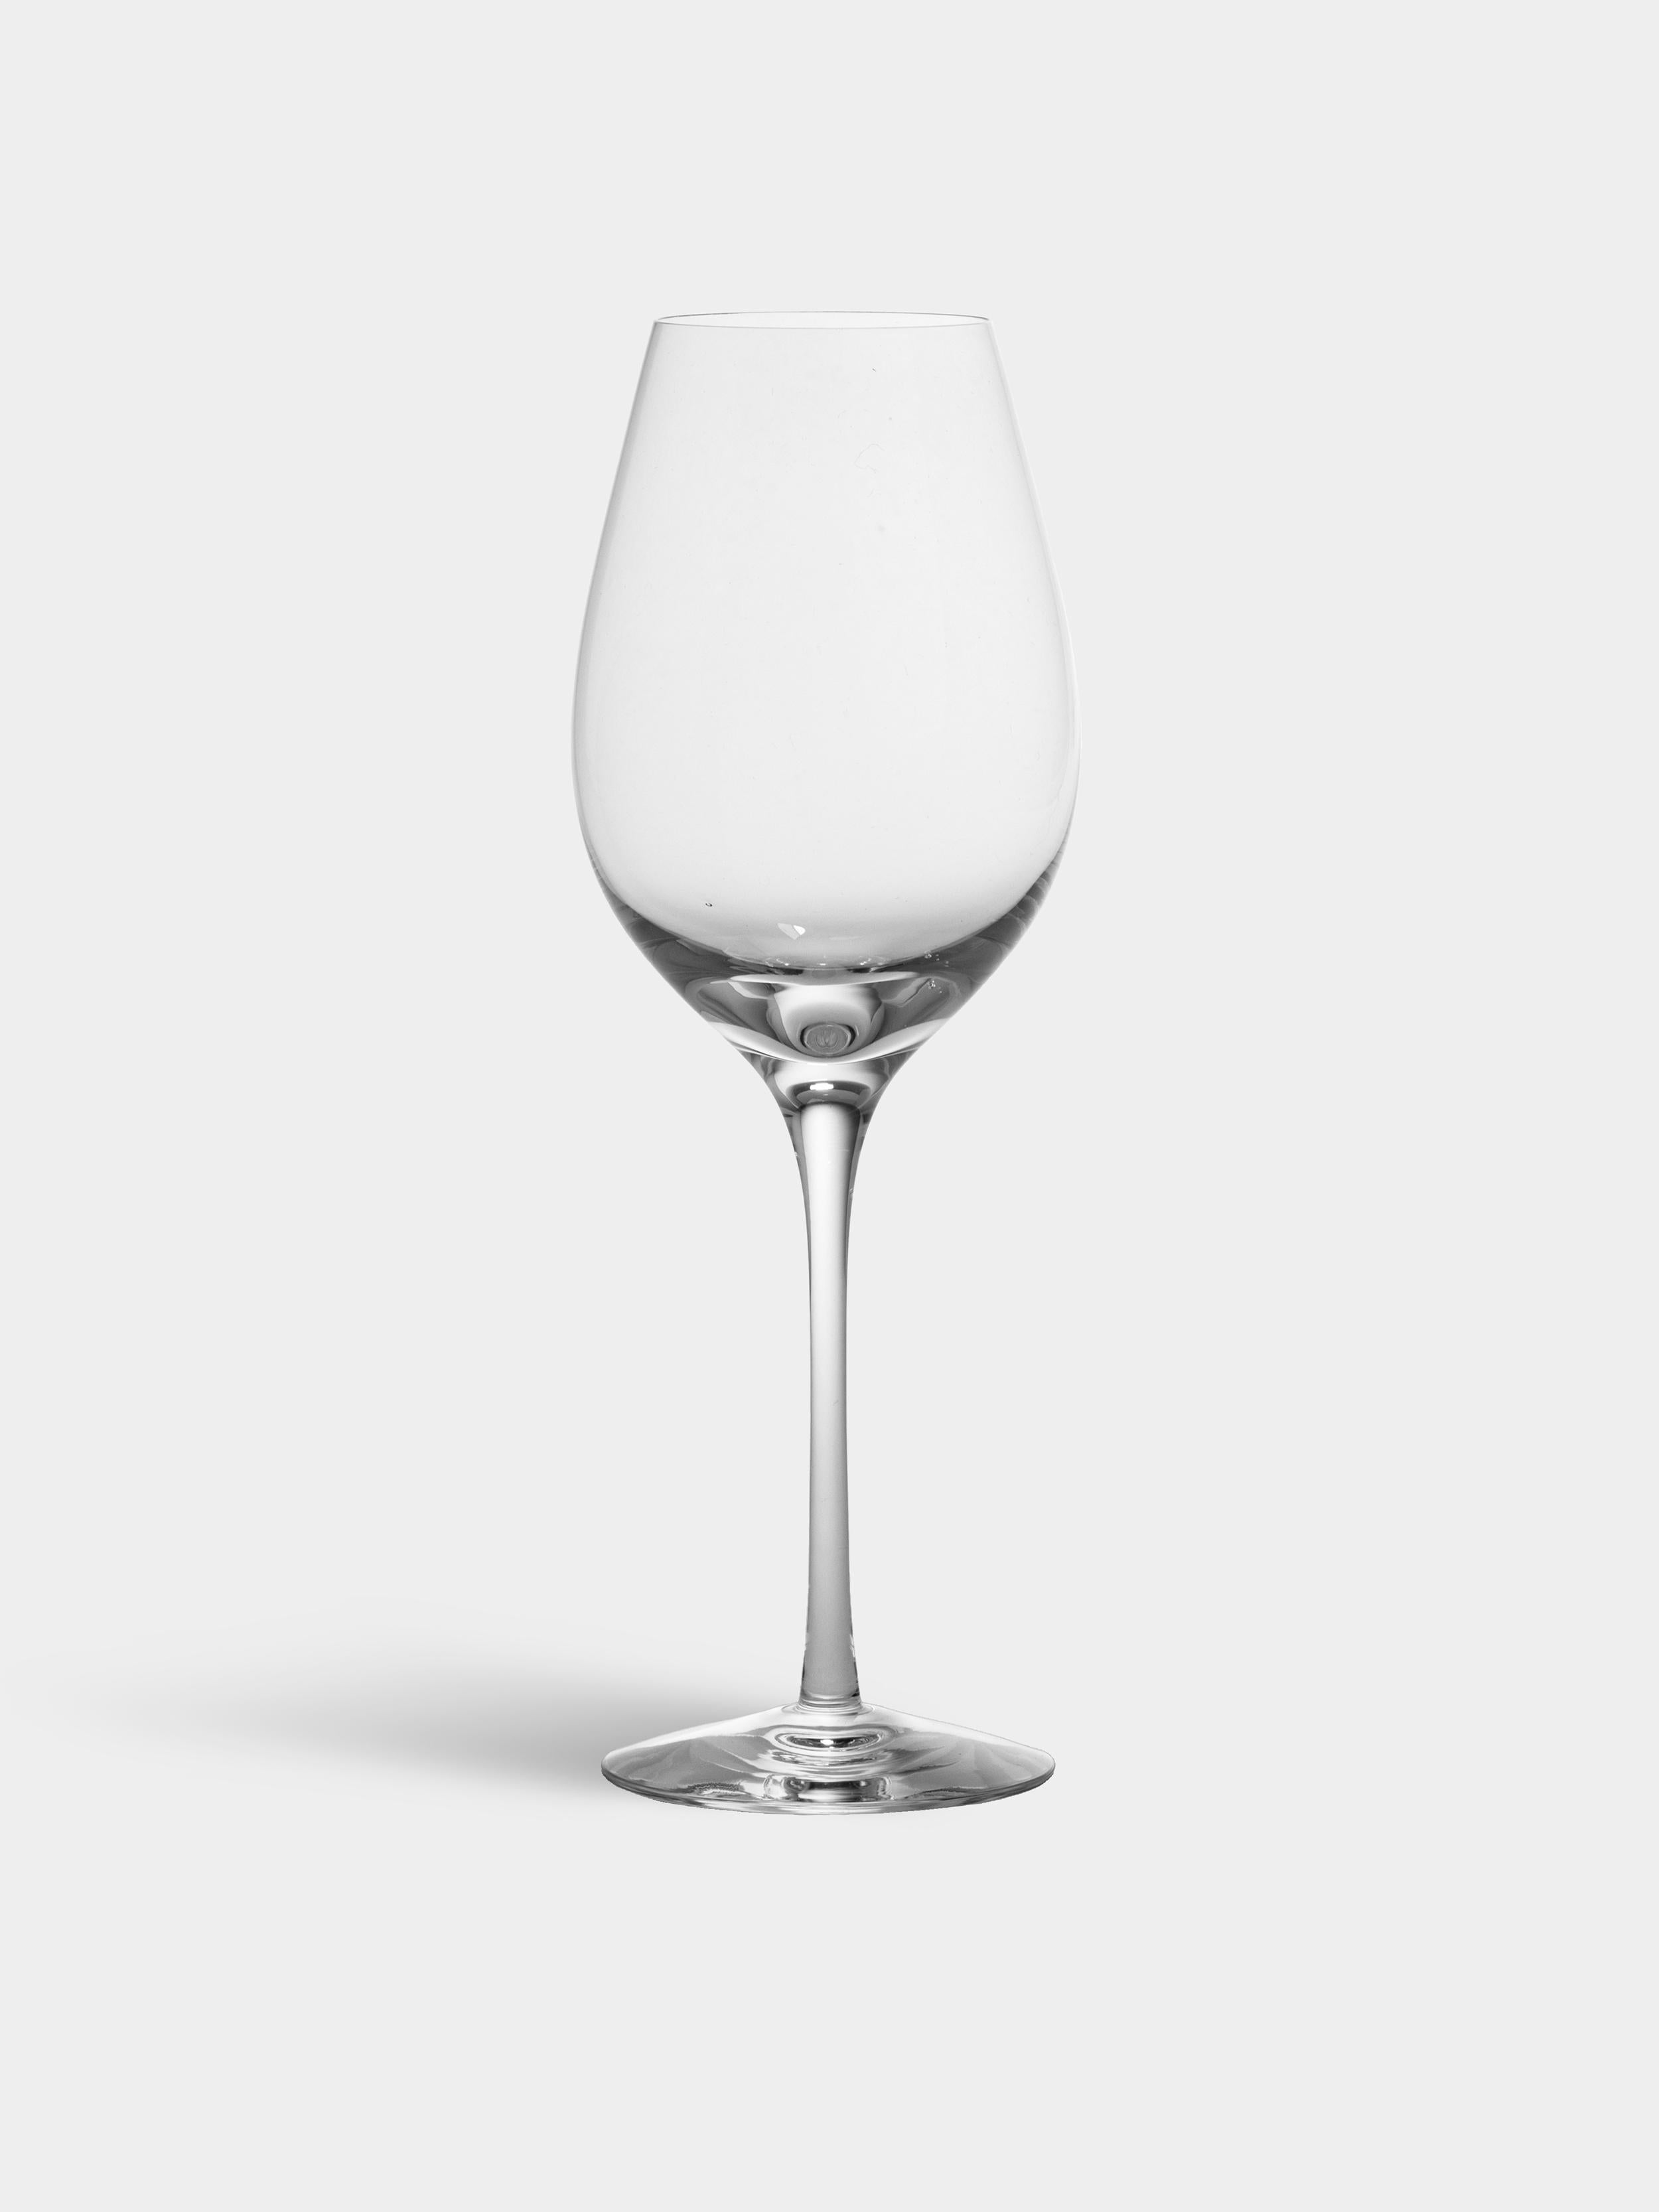 Difference Fruit from Orrefors holds 15 oz and is outstanding for aromatic and full-bodied white wines. The glass brings out the complexity of fruity wines and allows their aromas to develop and bloom. Recommended wines are classic white Burgundies,